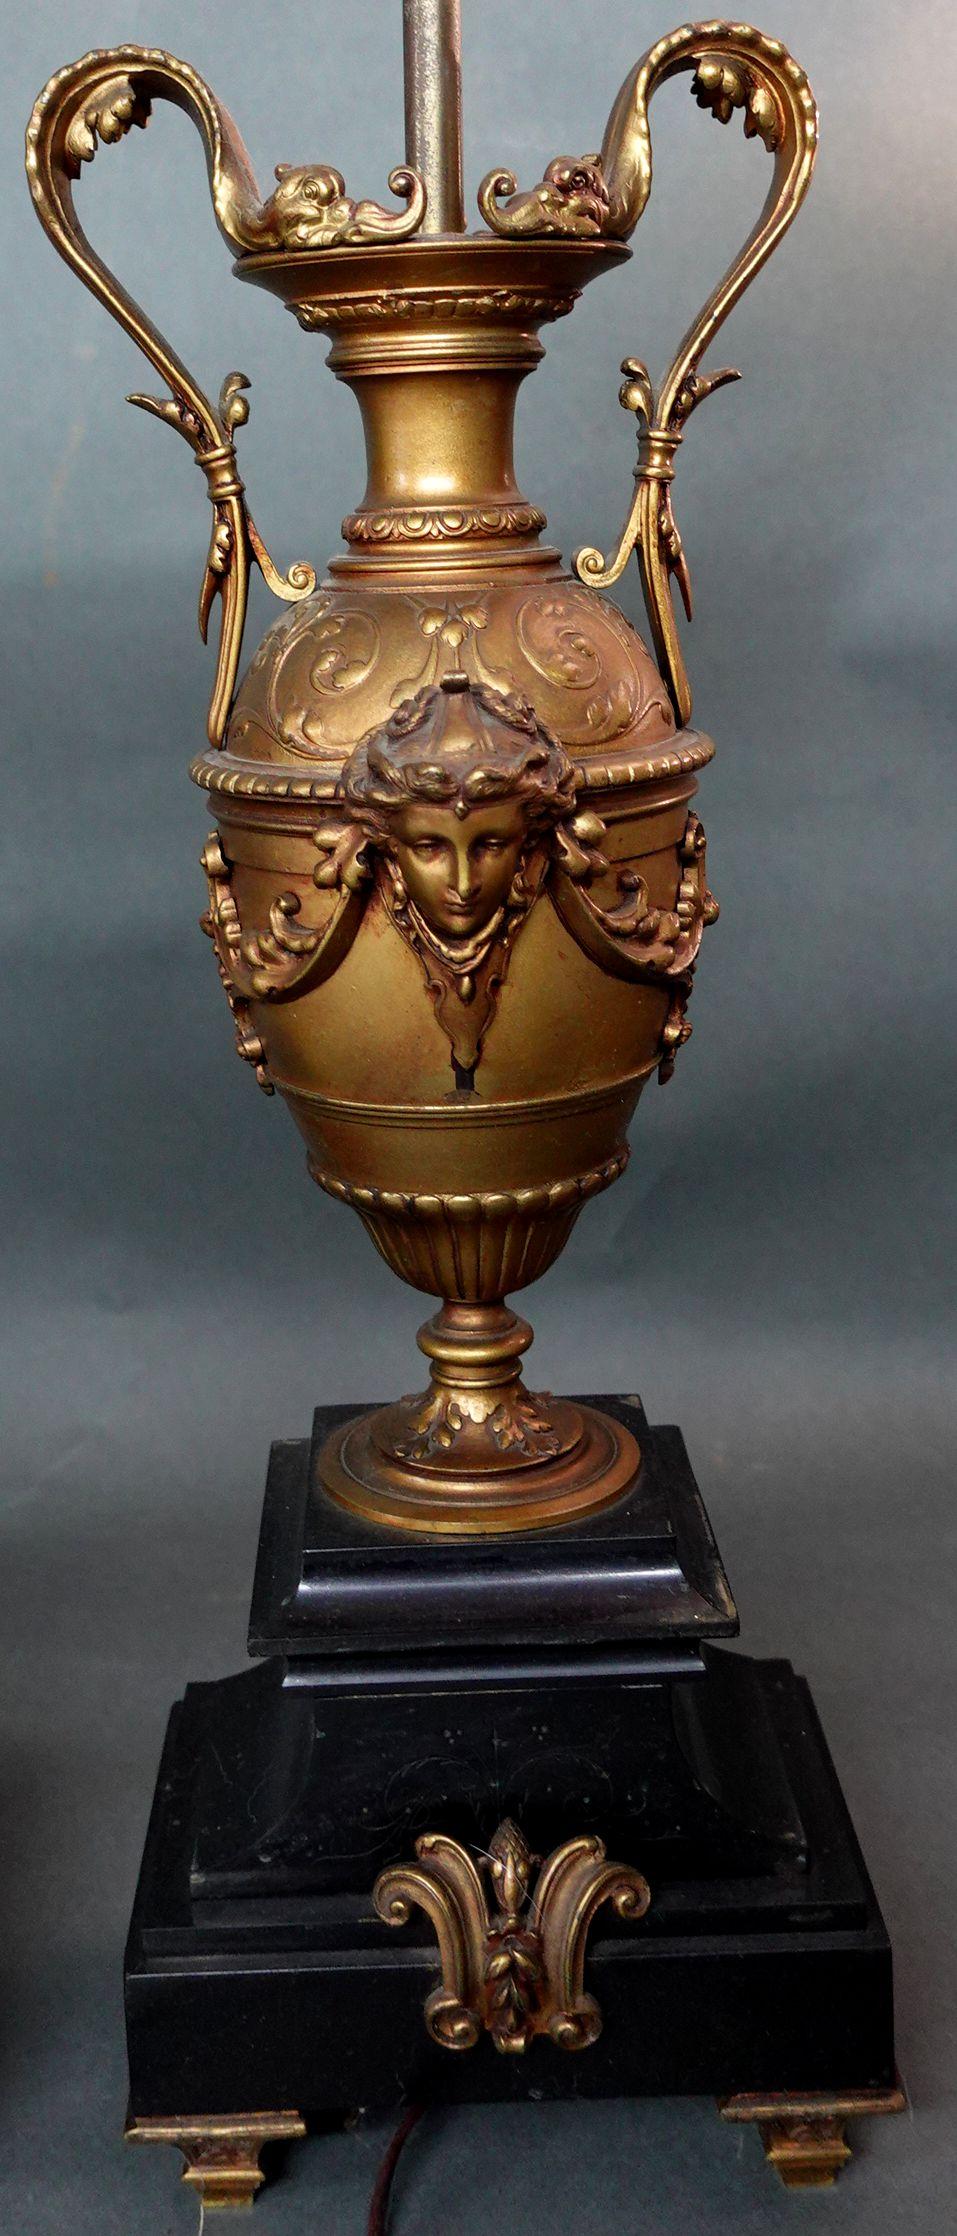 North American Pair of Neoclassical-Style Gilt-Bronze Urns Lamps on Black Marble Bases For Sale